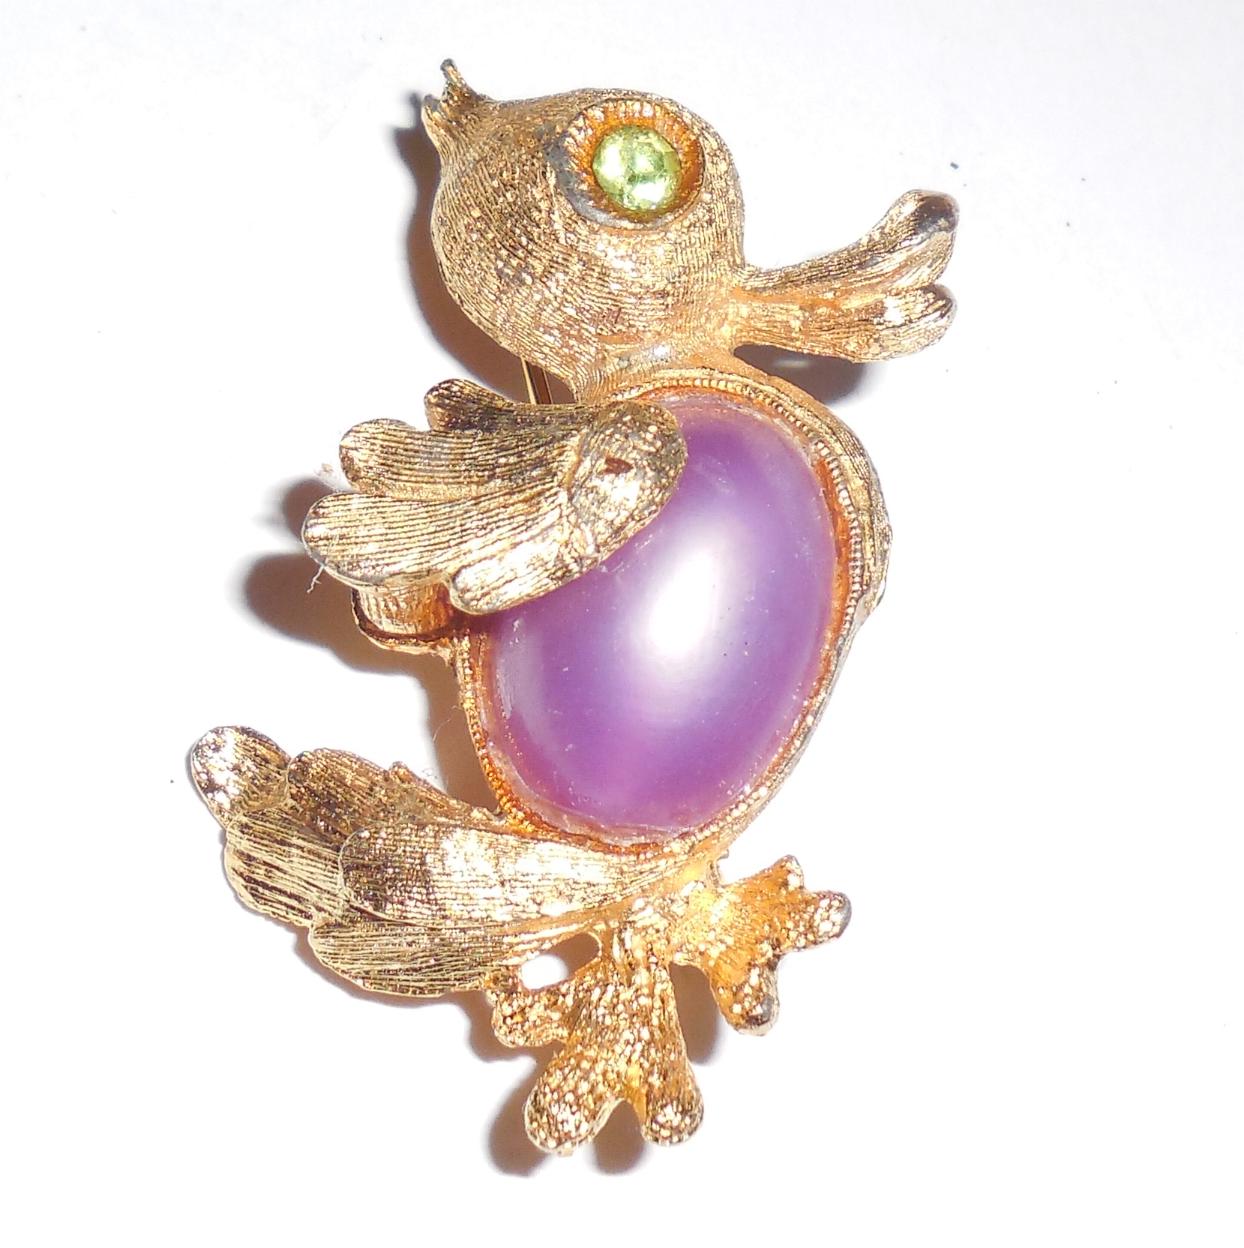 Vintage DODDS 11 W 30 ST INC Jelly Belly Duck Pin